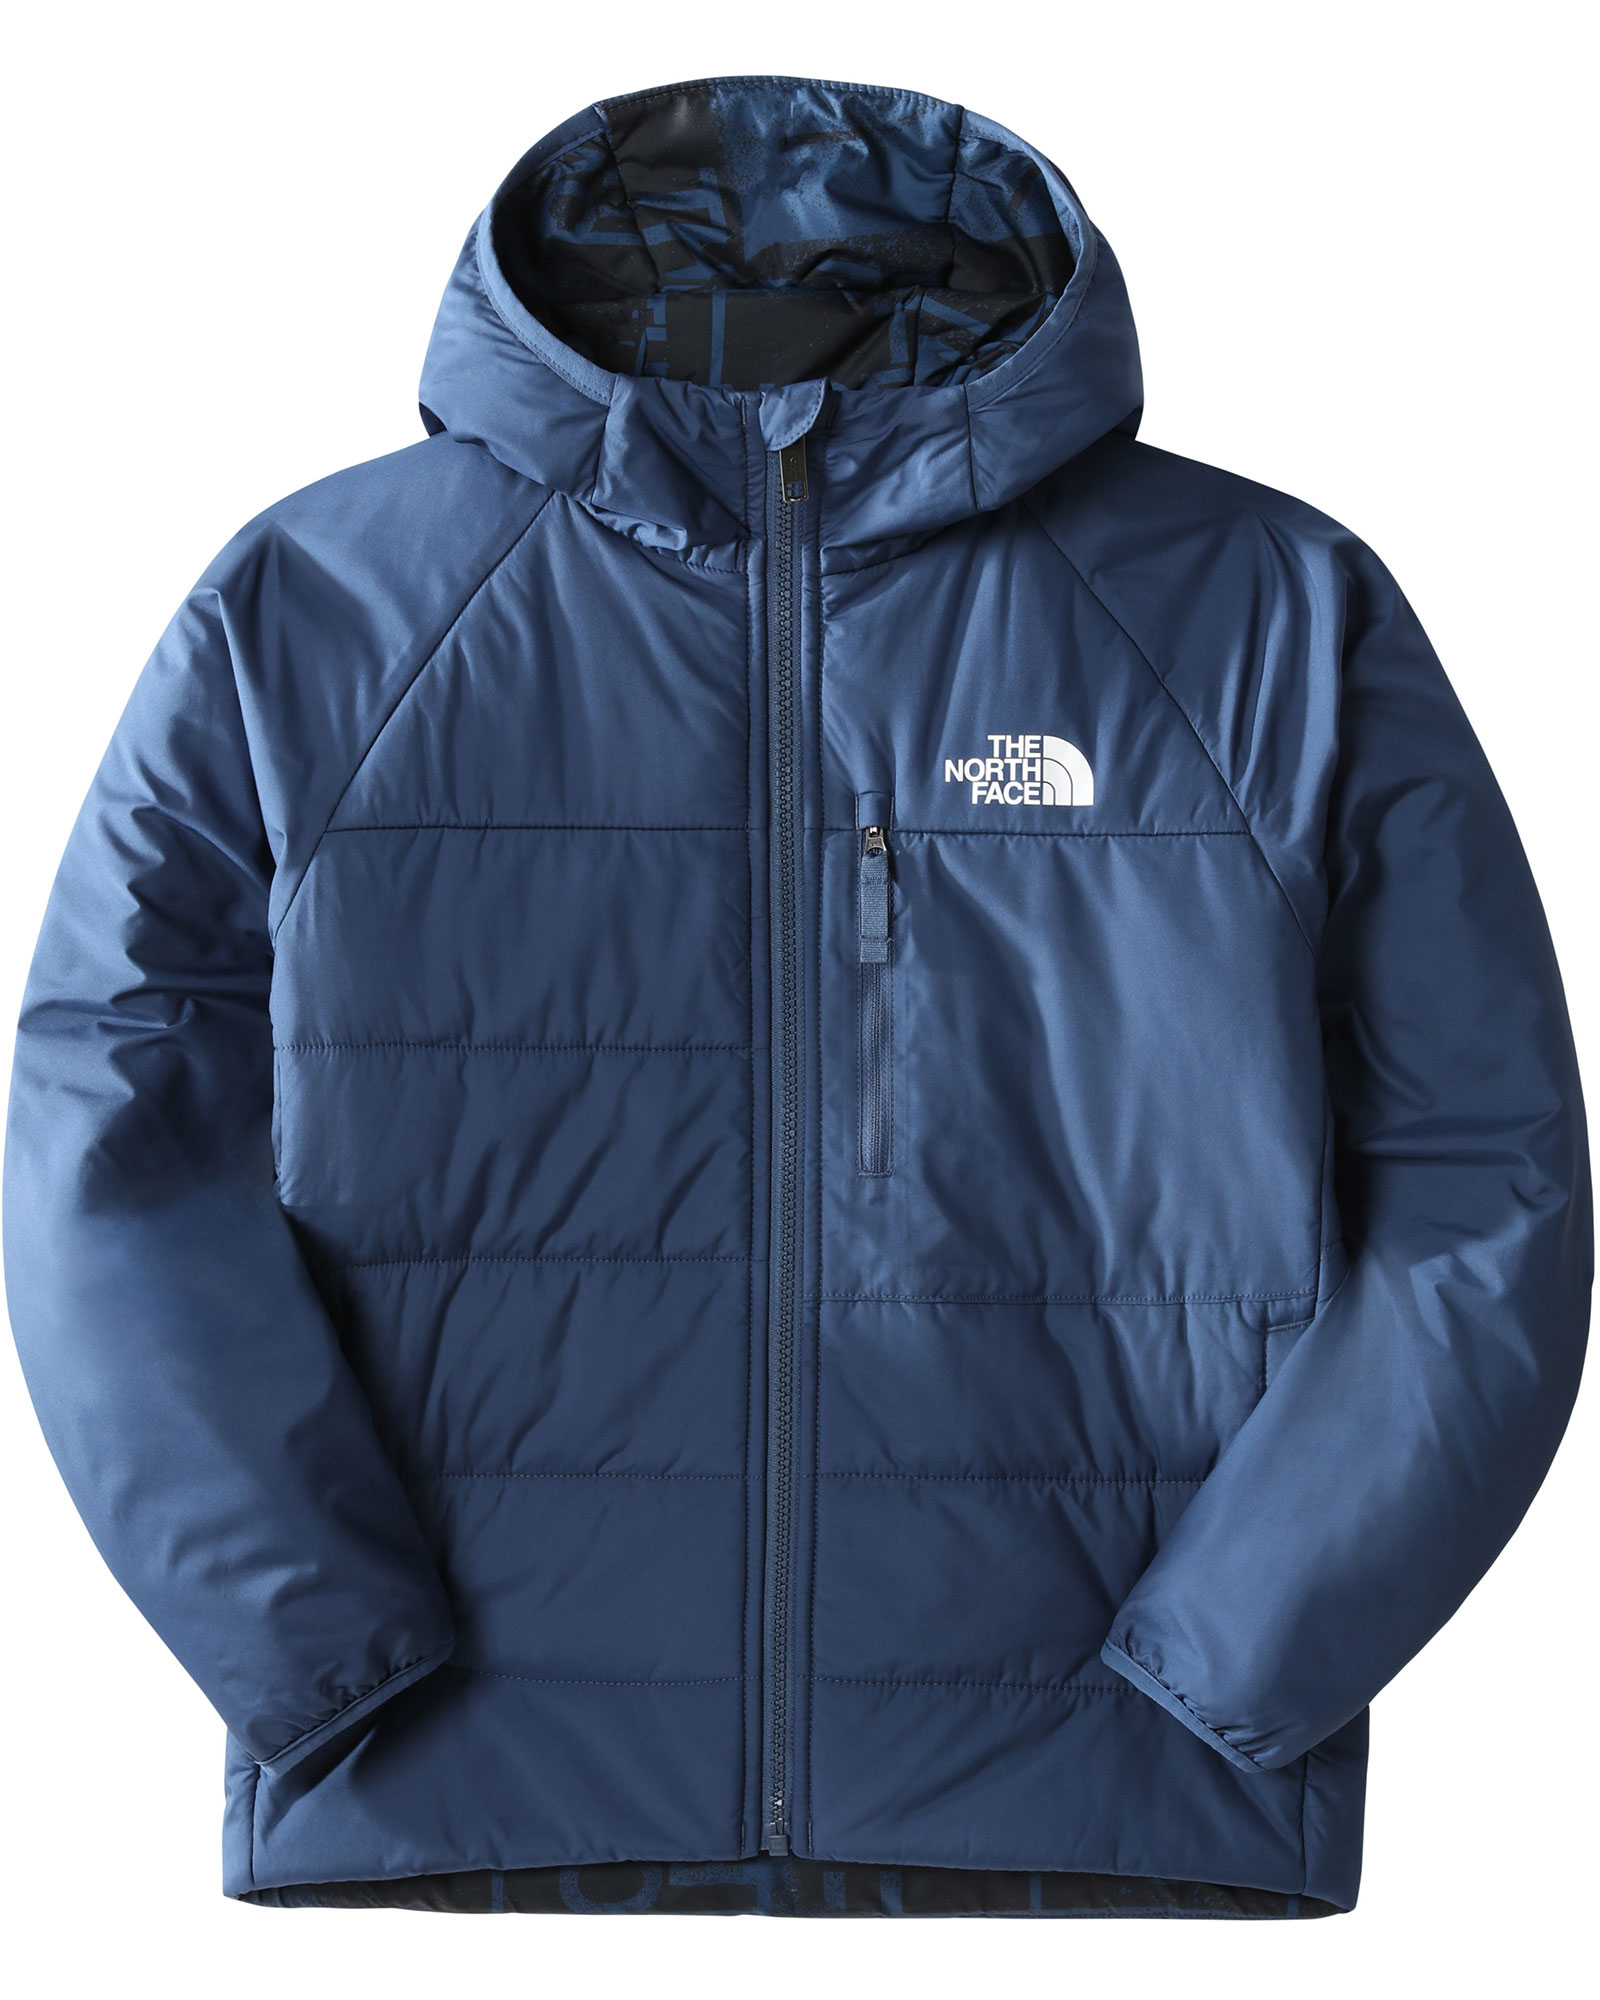 The North Face Reversible Perrito Kids Jacket